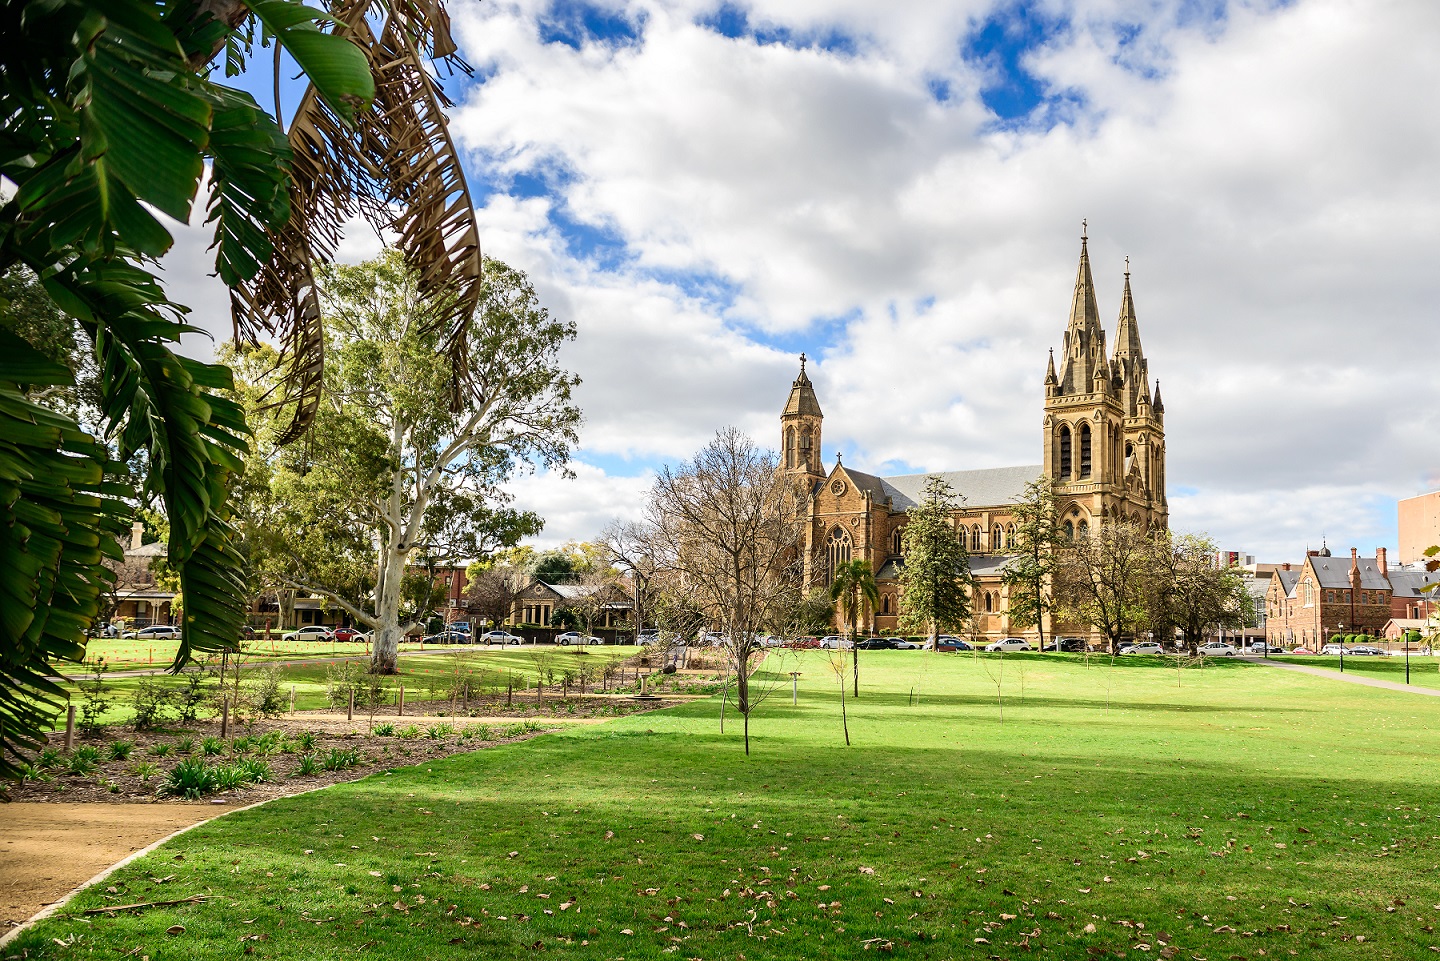 About Adelaide's Northern Suburbs